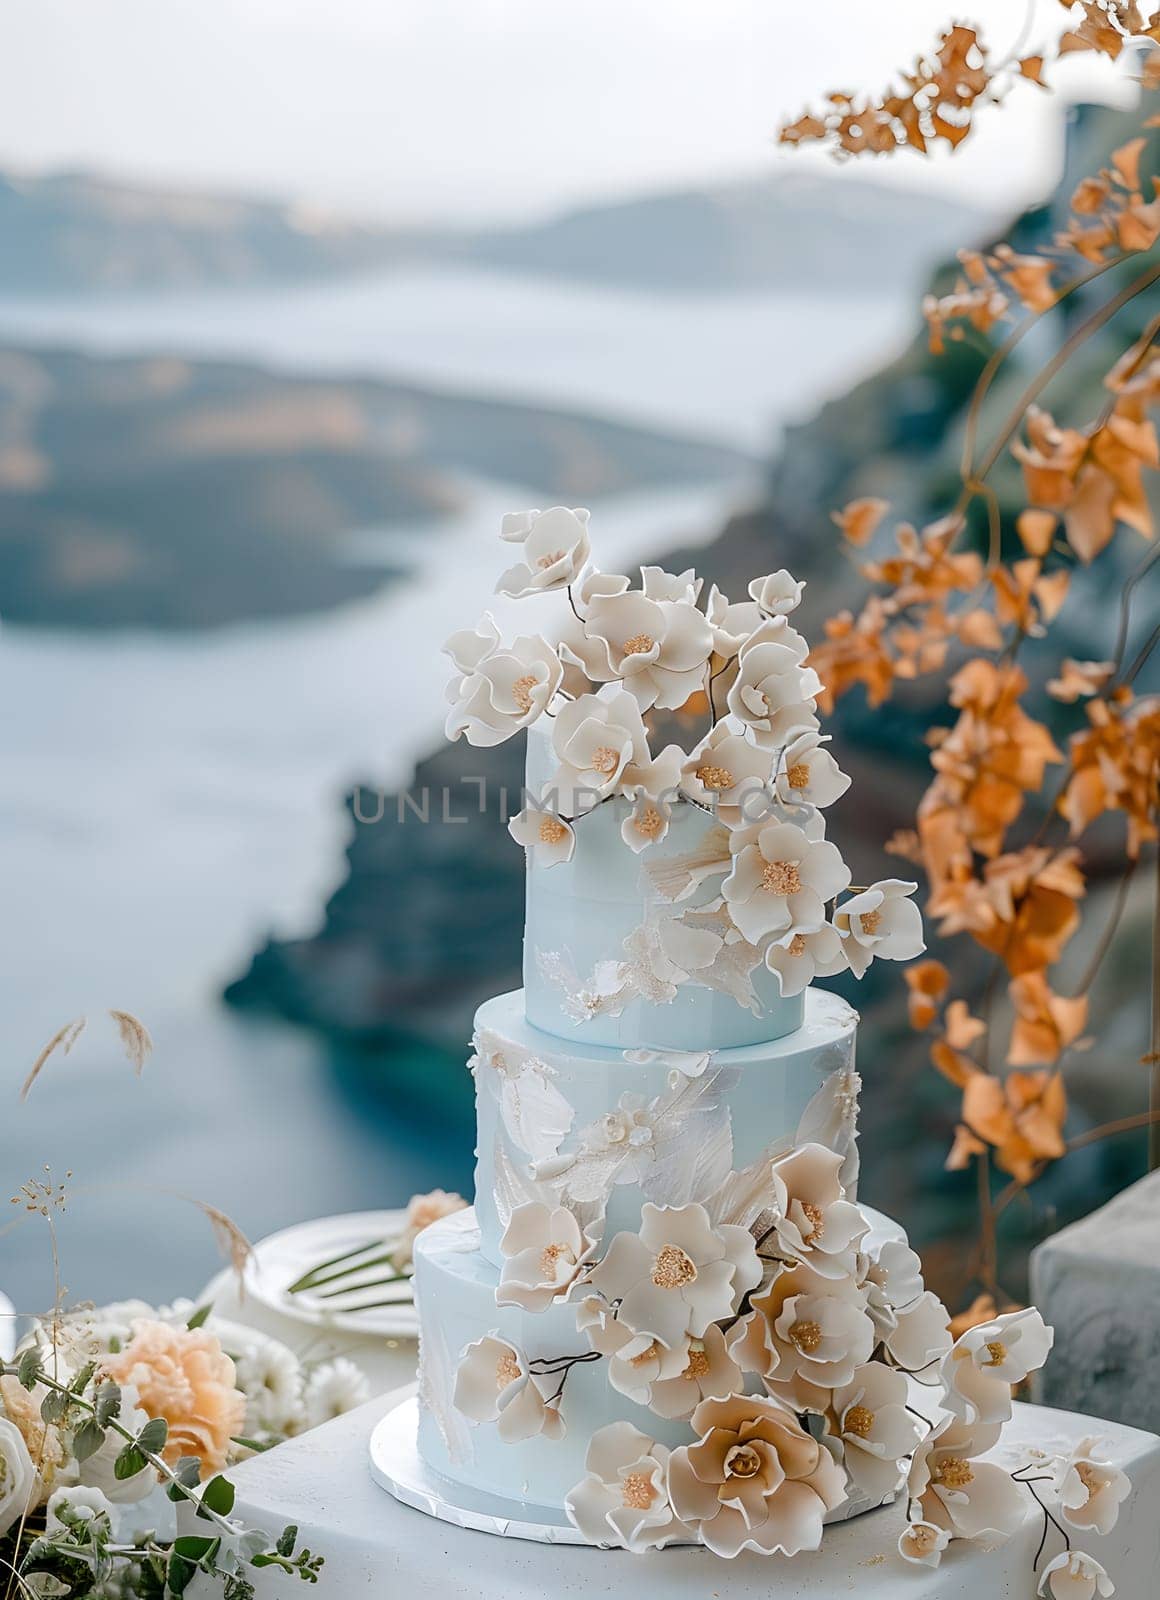 A wedding cake adorned with flowers sits on a table overlooking the ocean, creating a beautiful backdrop for the ceremony. The petals and plants complement the stunning view of the water and sky